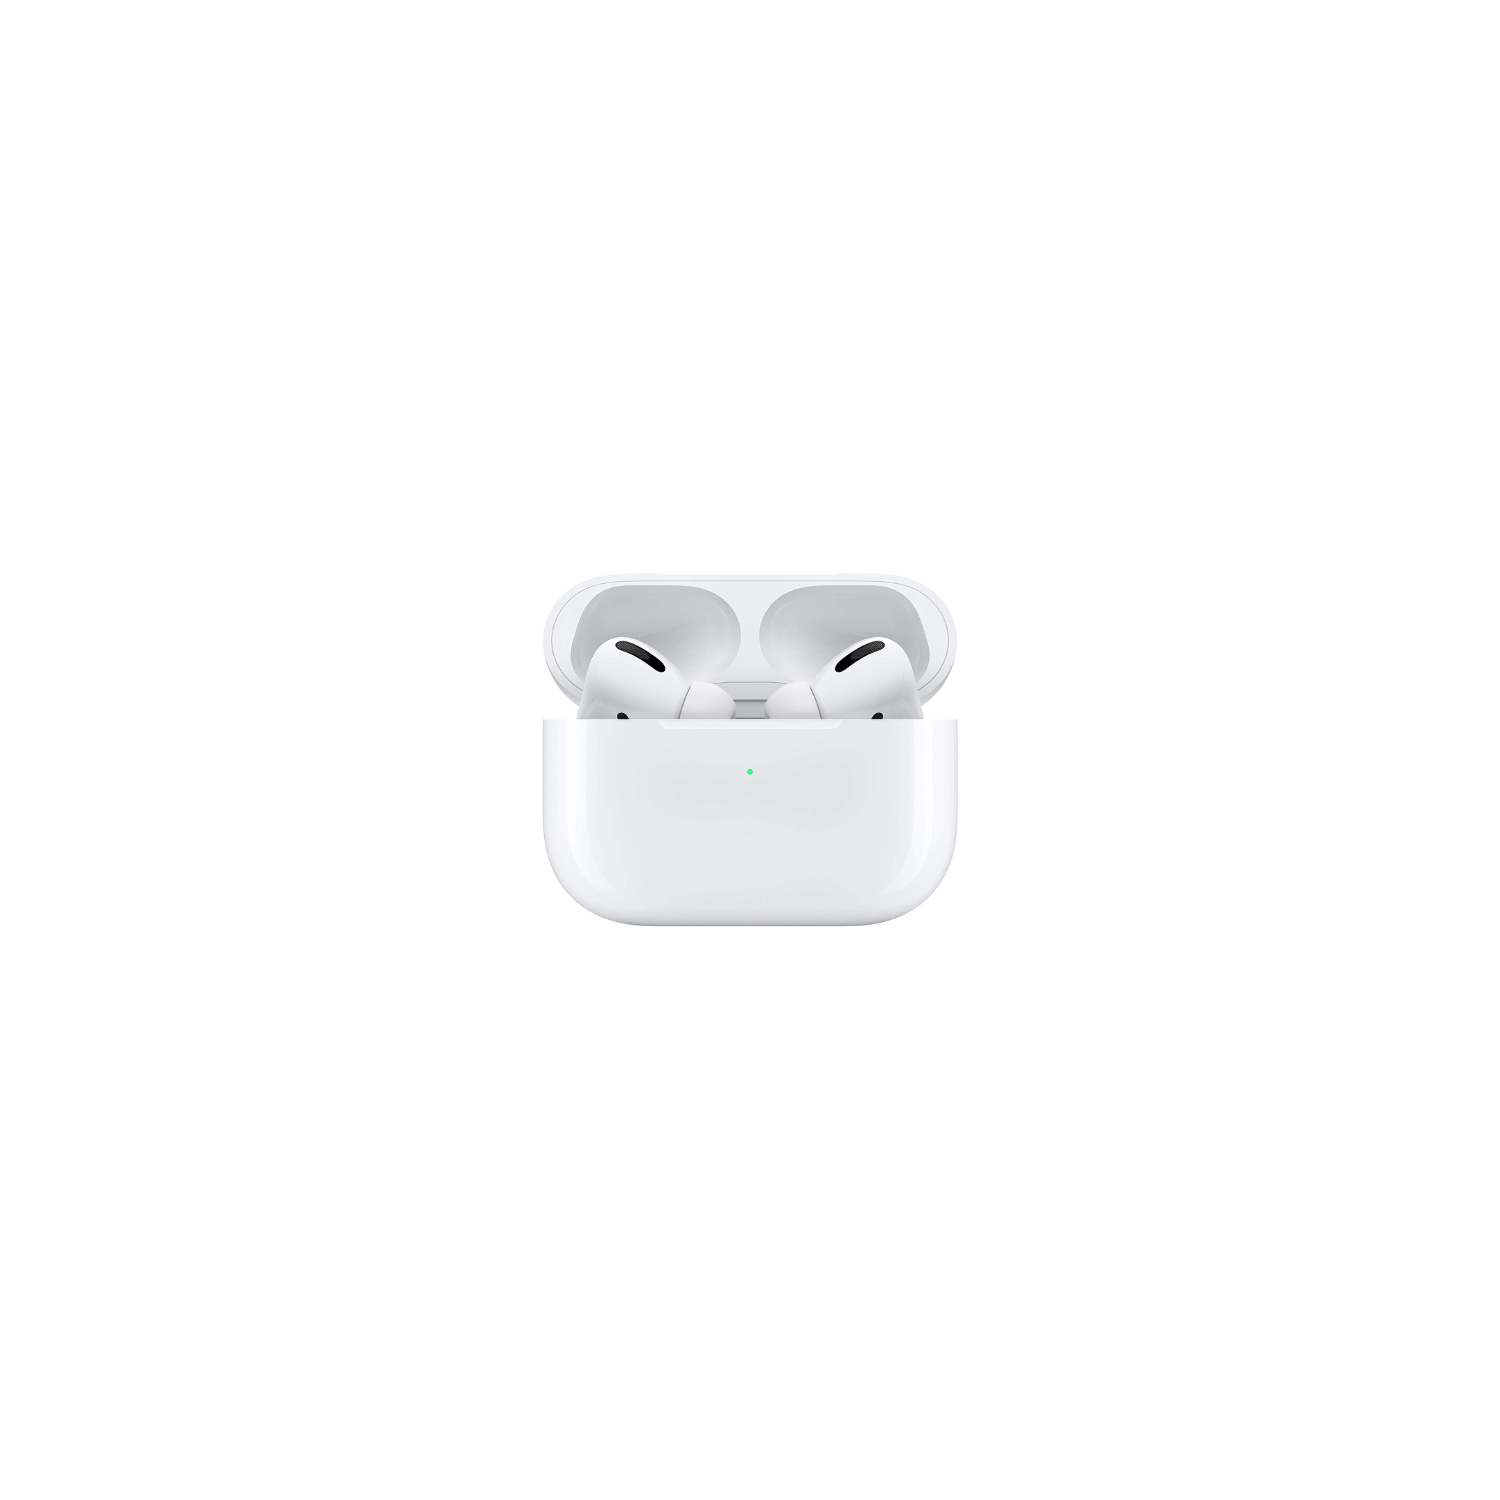 Apple AirPods Pro (1st Generation) In-Ear Noise Cancelling Truly Wireless Headphones with MagSafe Charging Case - Refurbished (Good)